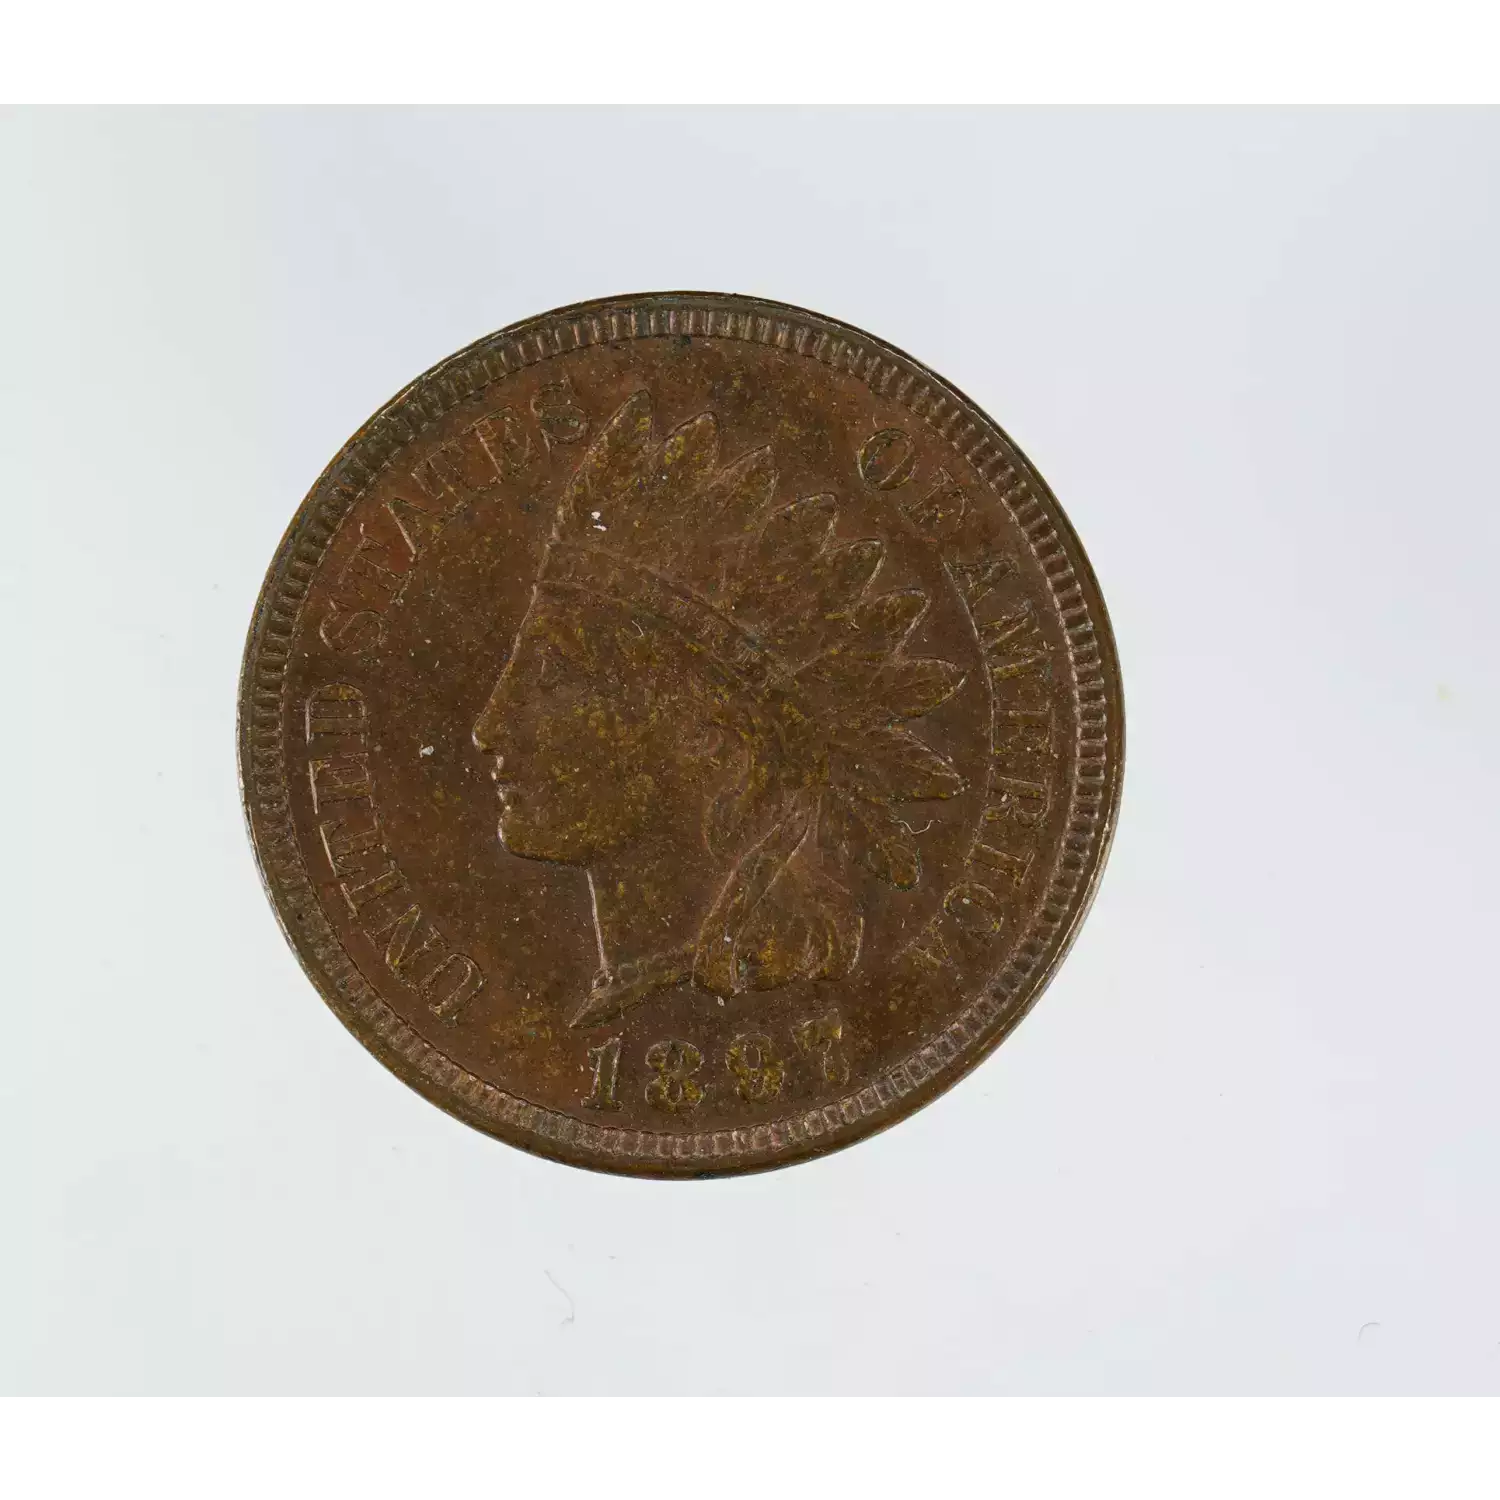 Small Cents-Indian Head 1859-1909 -Copper